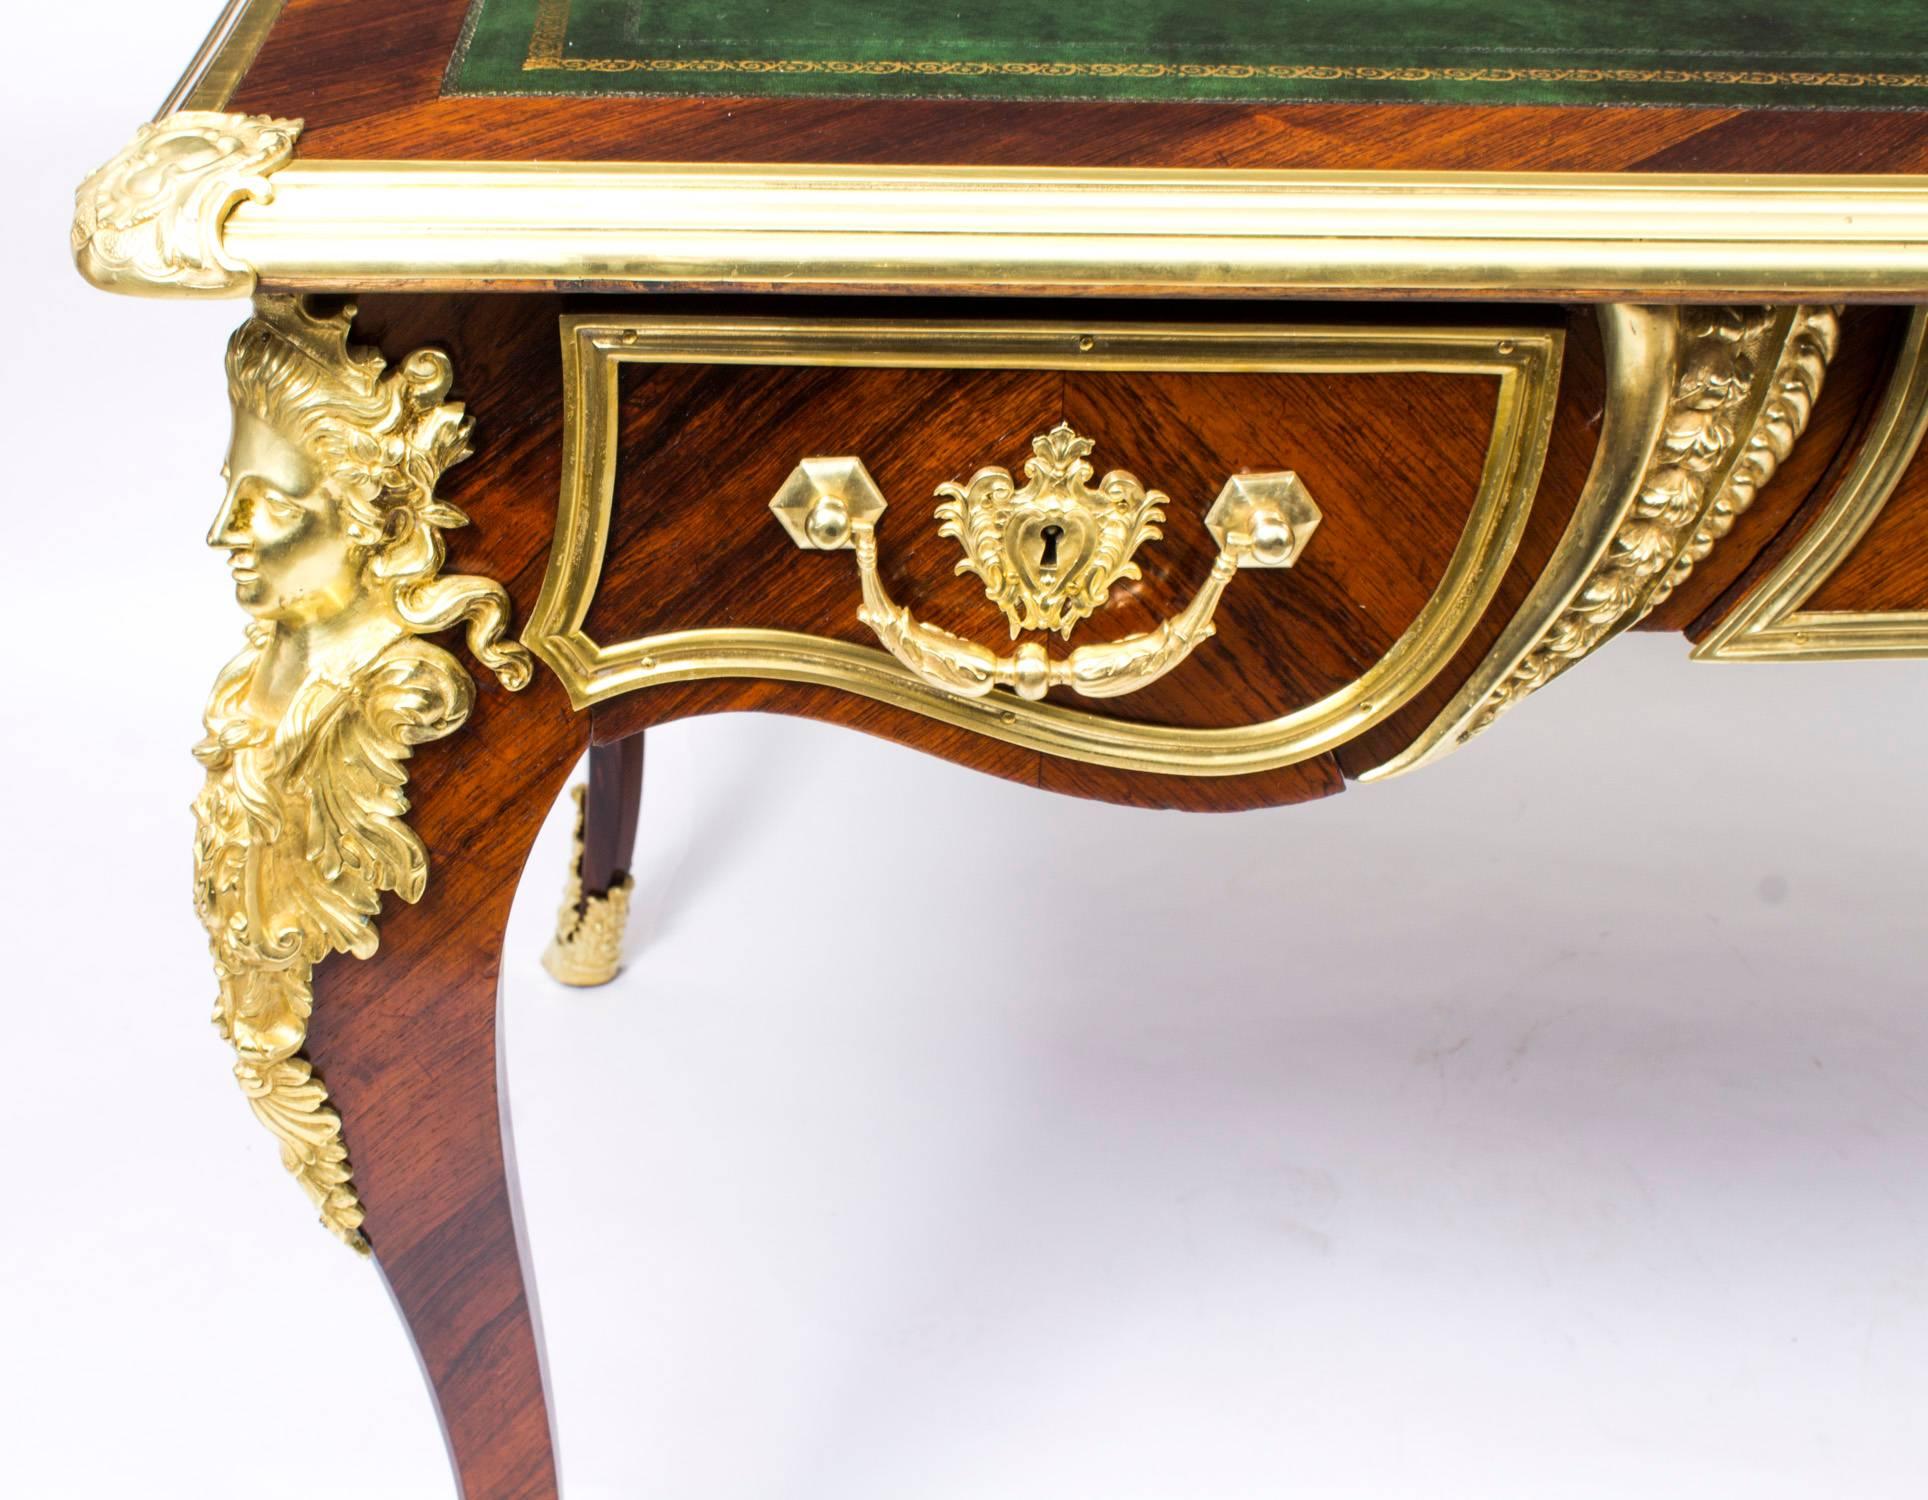 This is a gorgeous antique French kingwood Louis revival bureau plat with highly decorative ormolu mounts, circa 1860 in date.

The rectangular top with with gilt bronze border, raised corner cartouches and a gold tooled green leather inset